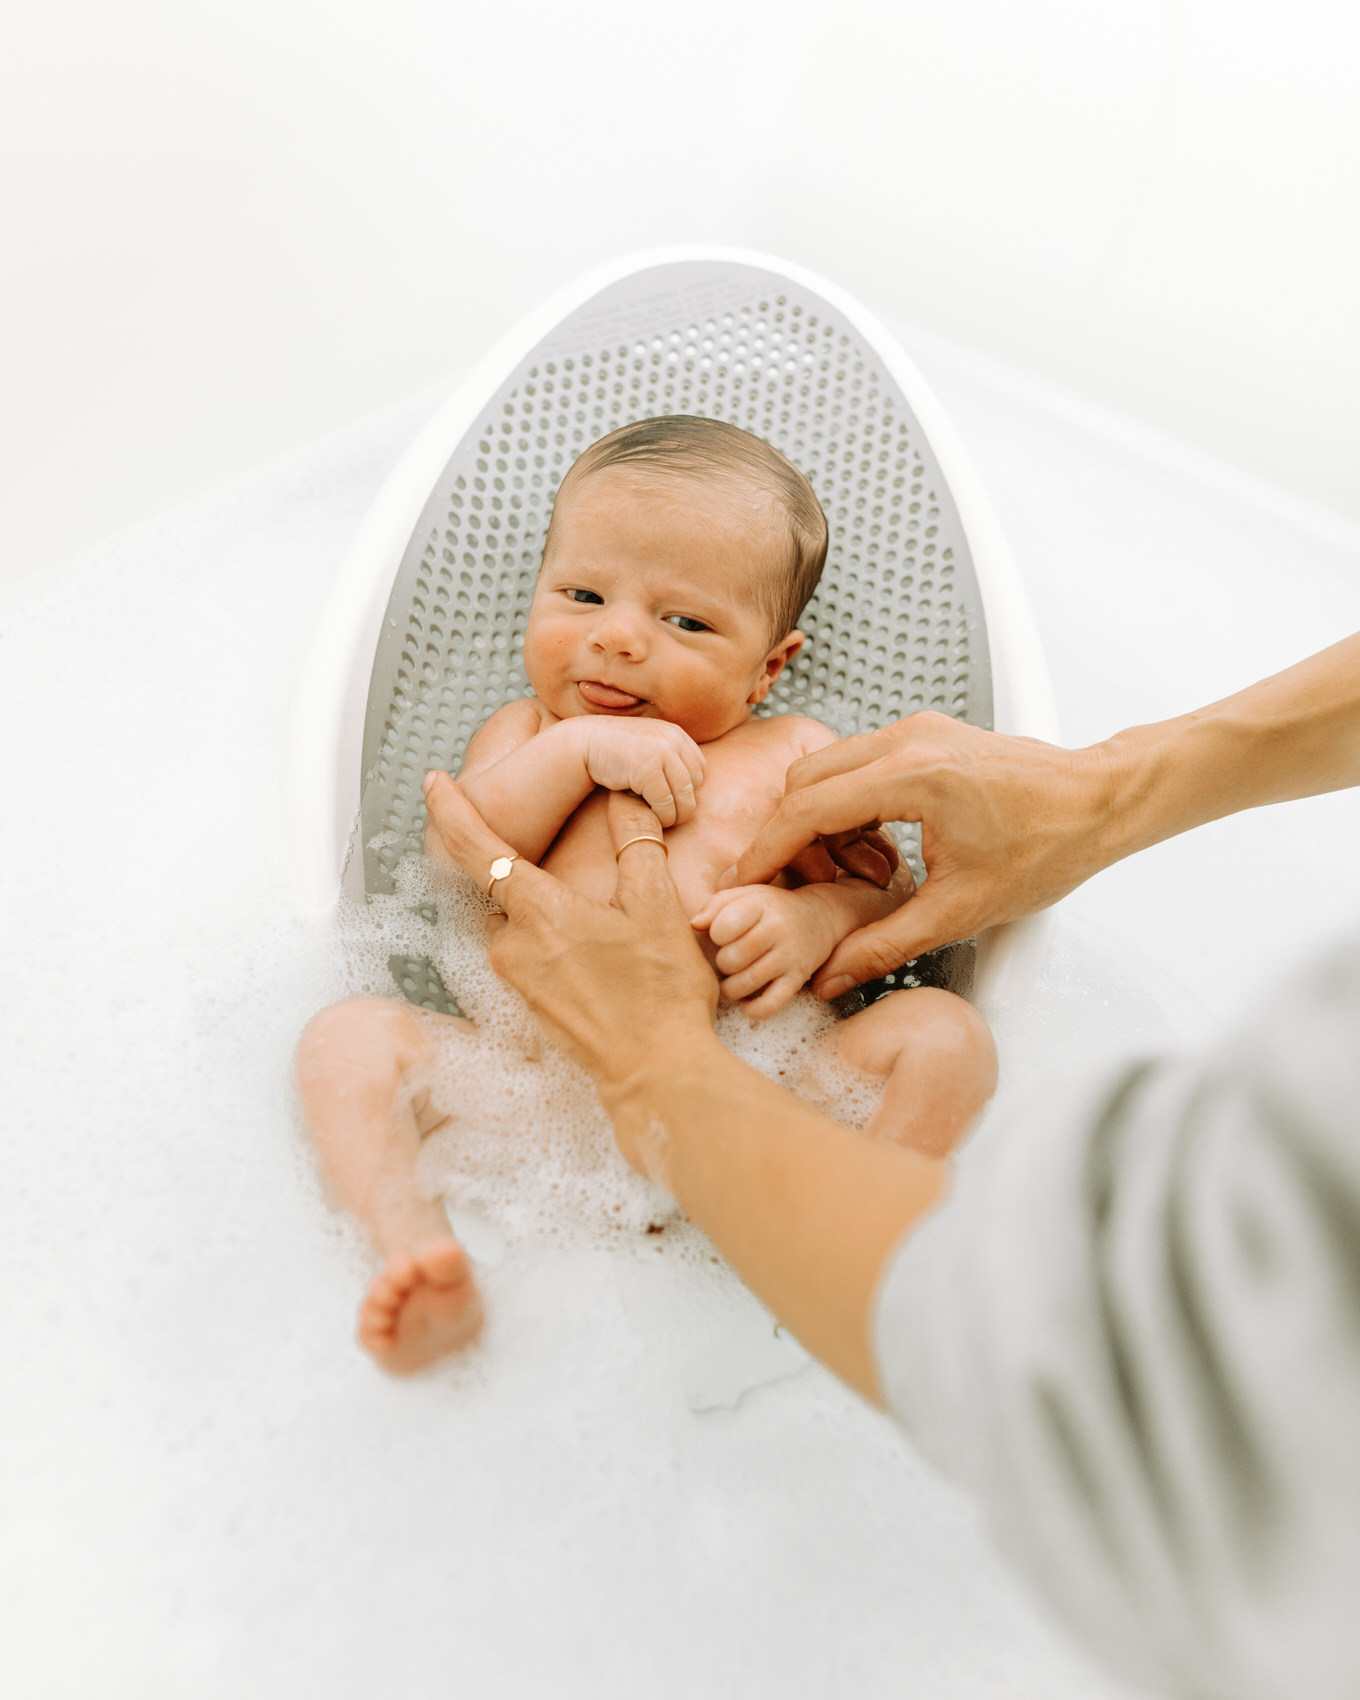 Free Baby Bath Stuff - Baby Bath Things and Accessories You Should Have ...